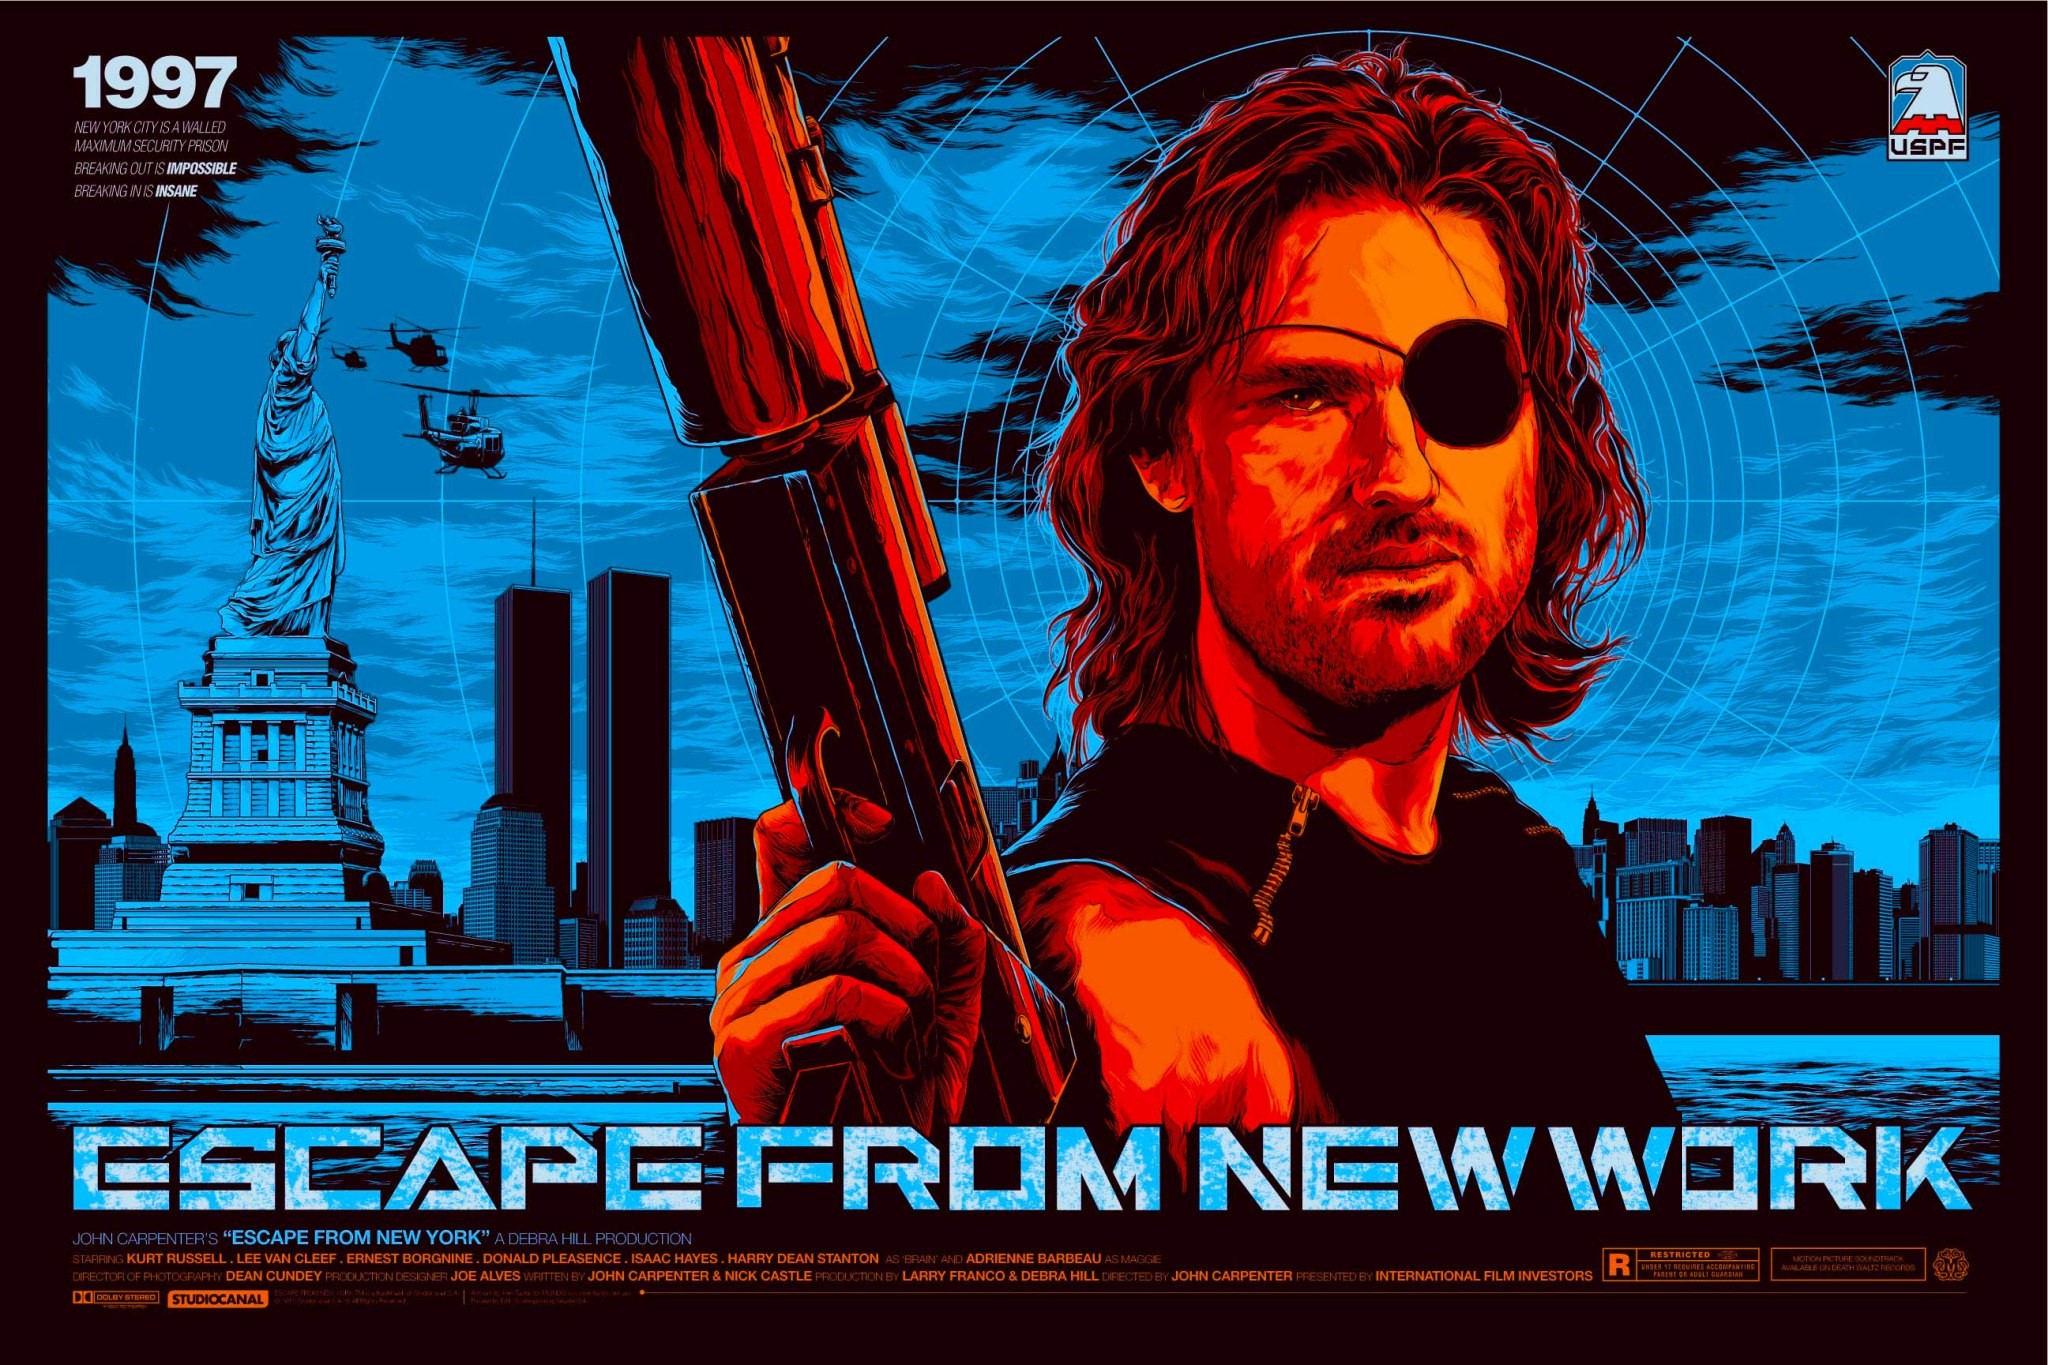 The box art for the 90s classic film: Escape From New York with title changed from New York to New Work